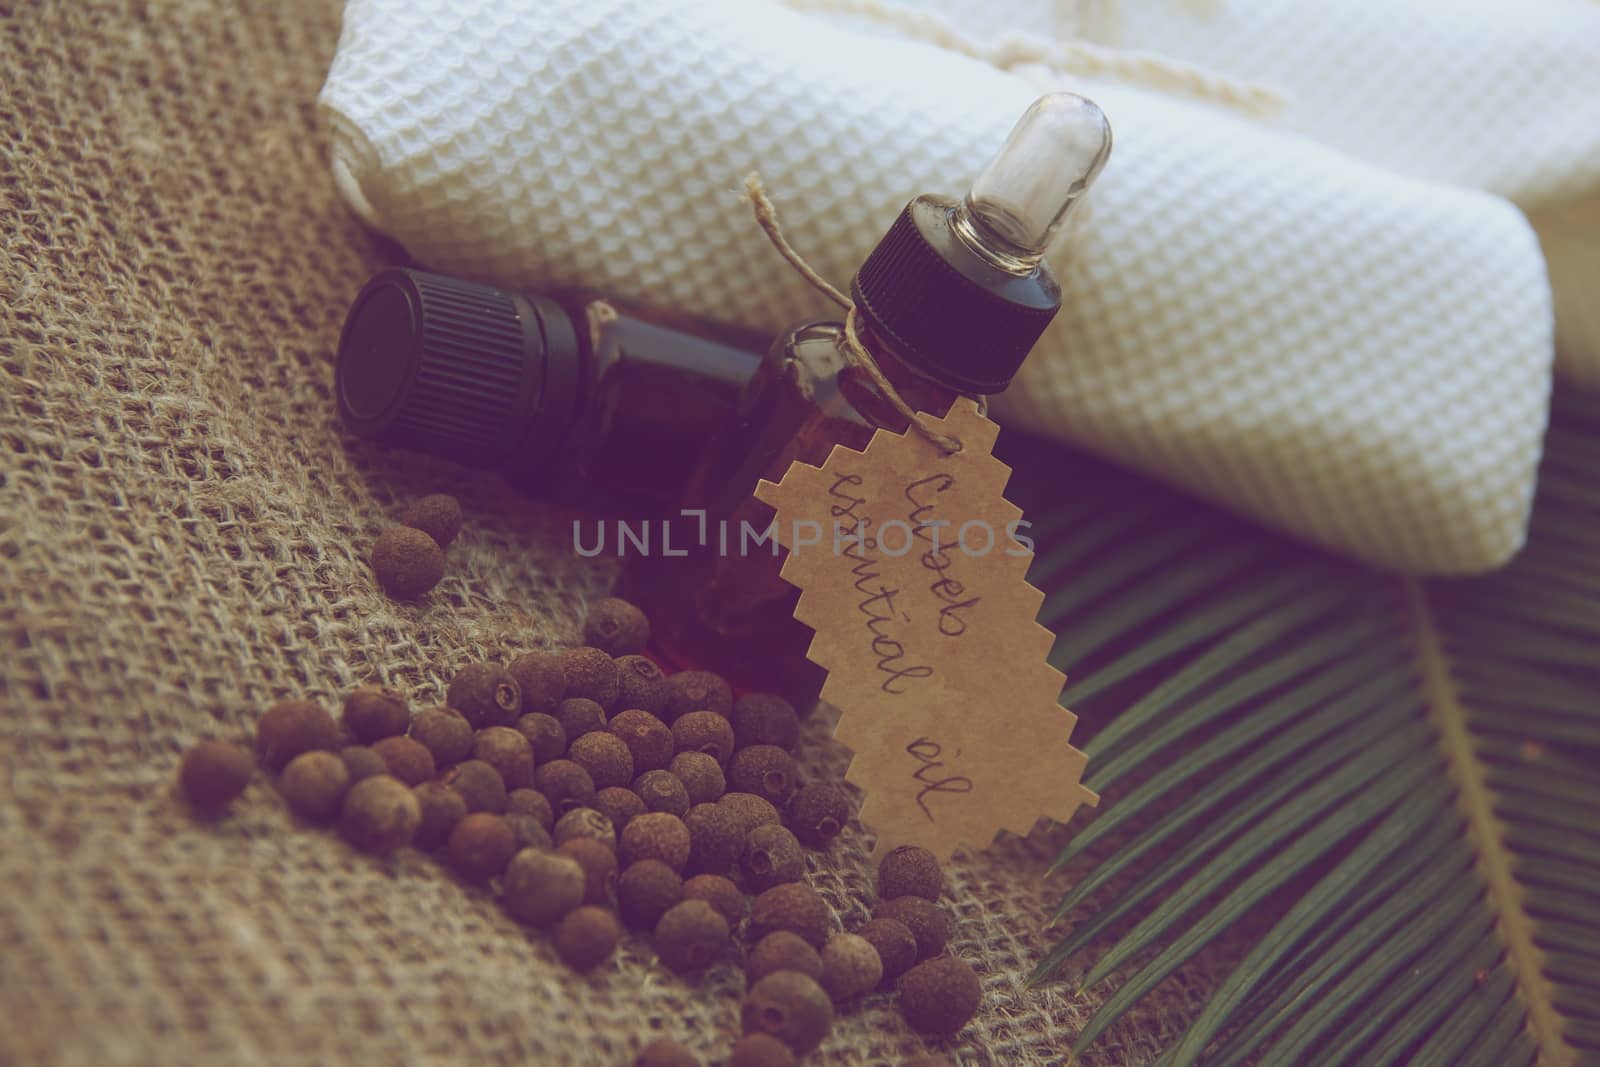 A bottle of cubeb essential oil on the sackcloth. Vintage